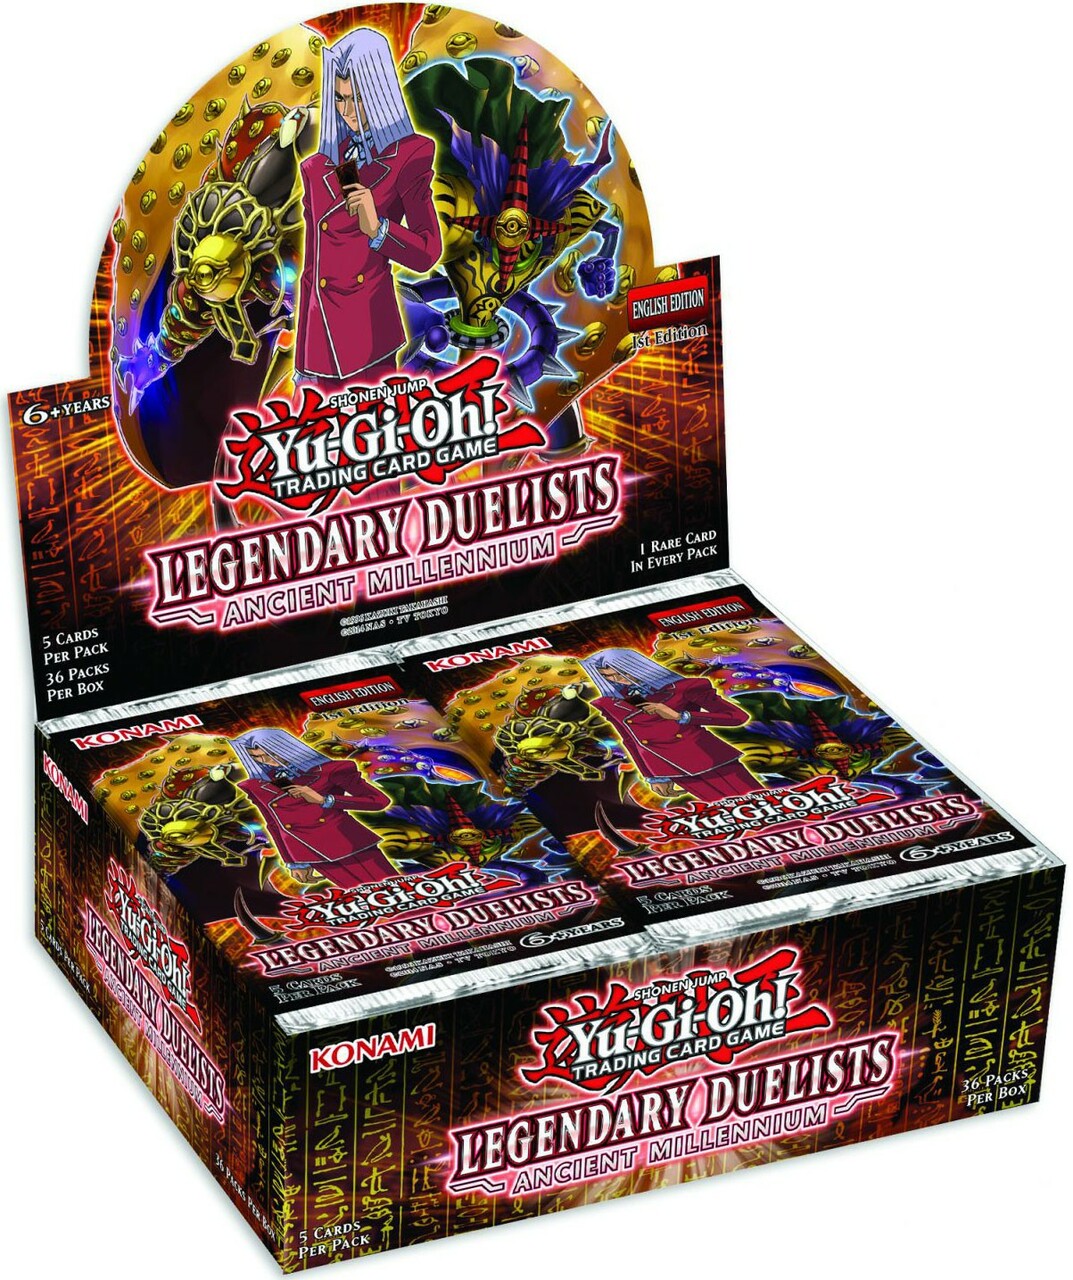 Legendary Duelists: Ancient Millennium - Booster Box (1st Edition) | Total Play